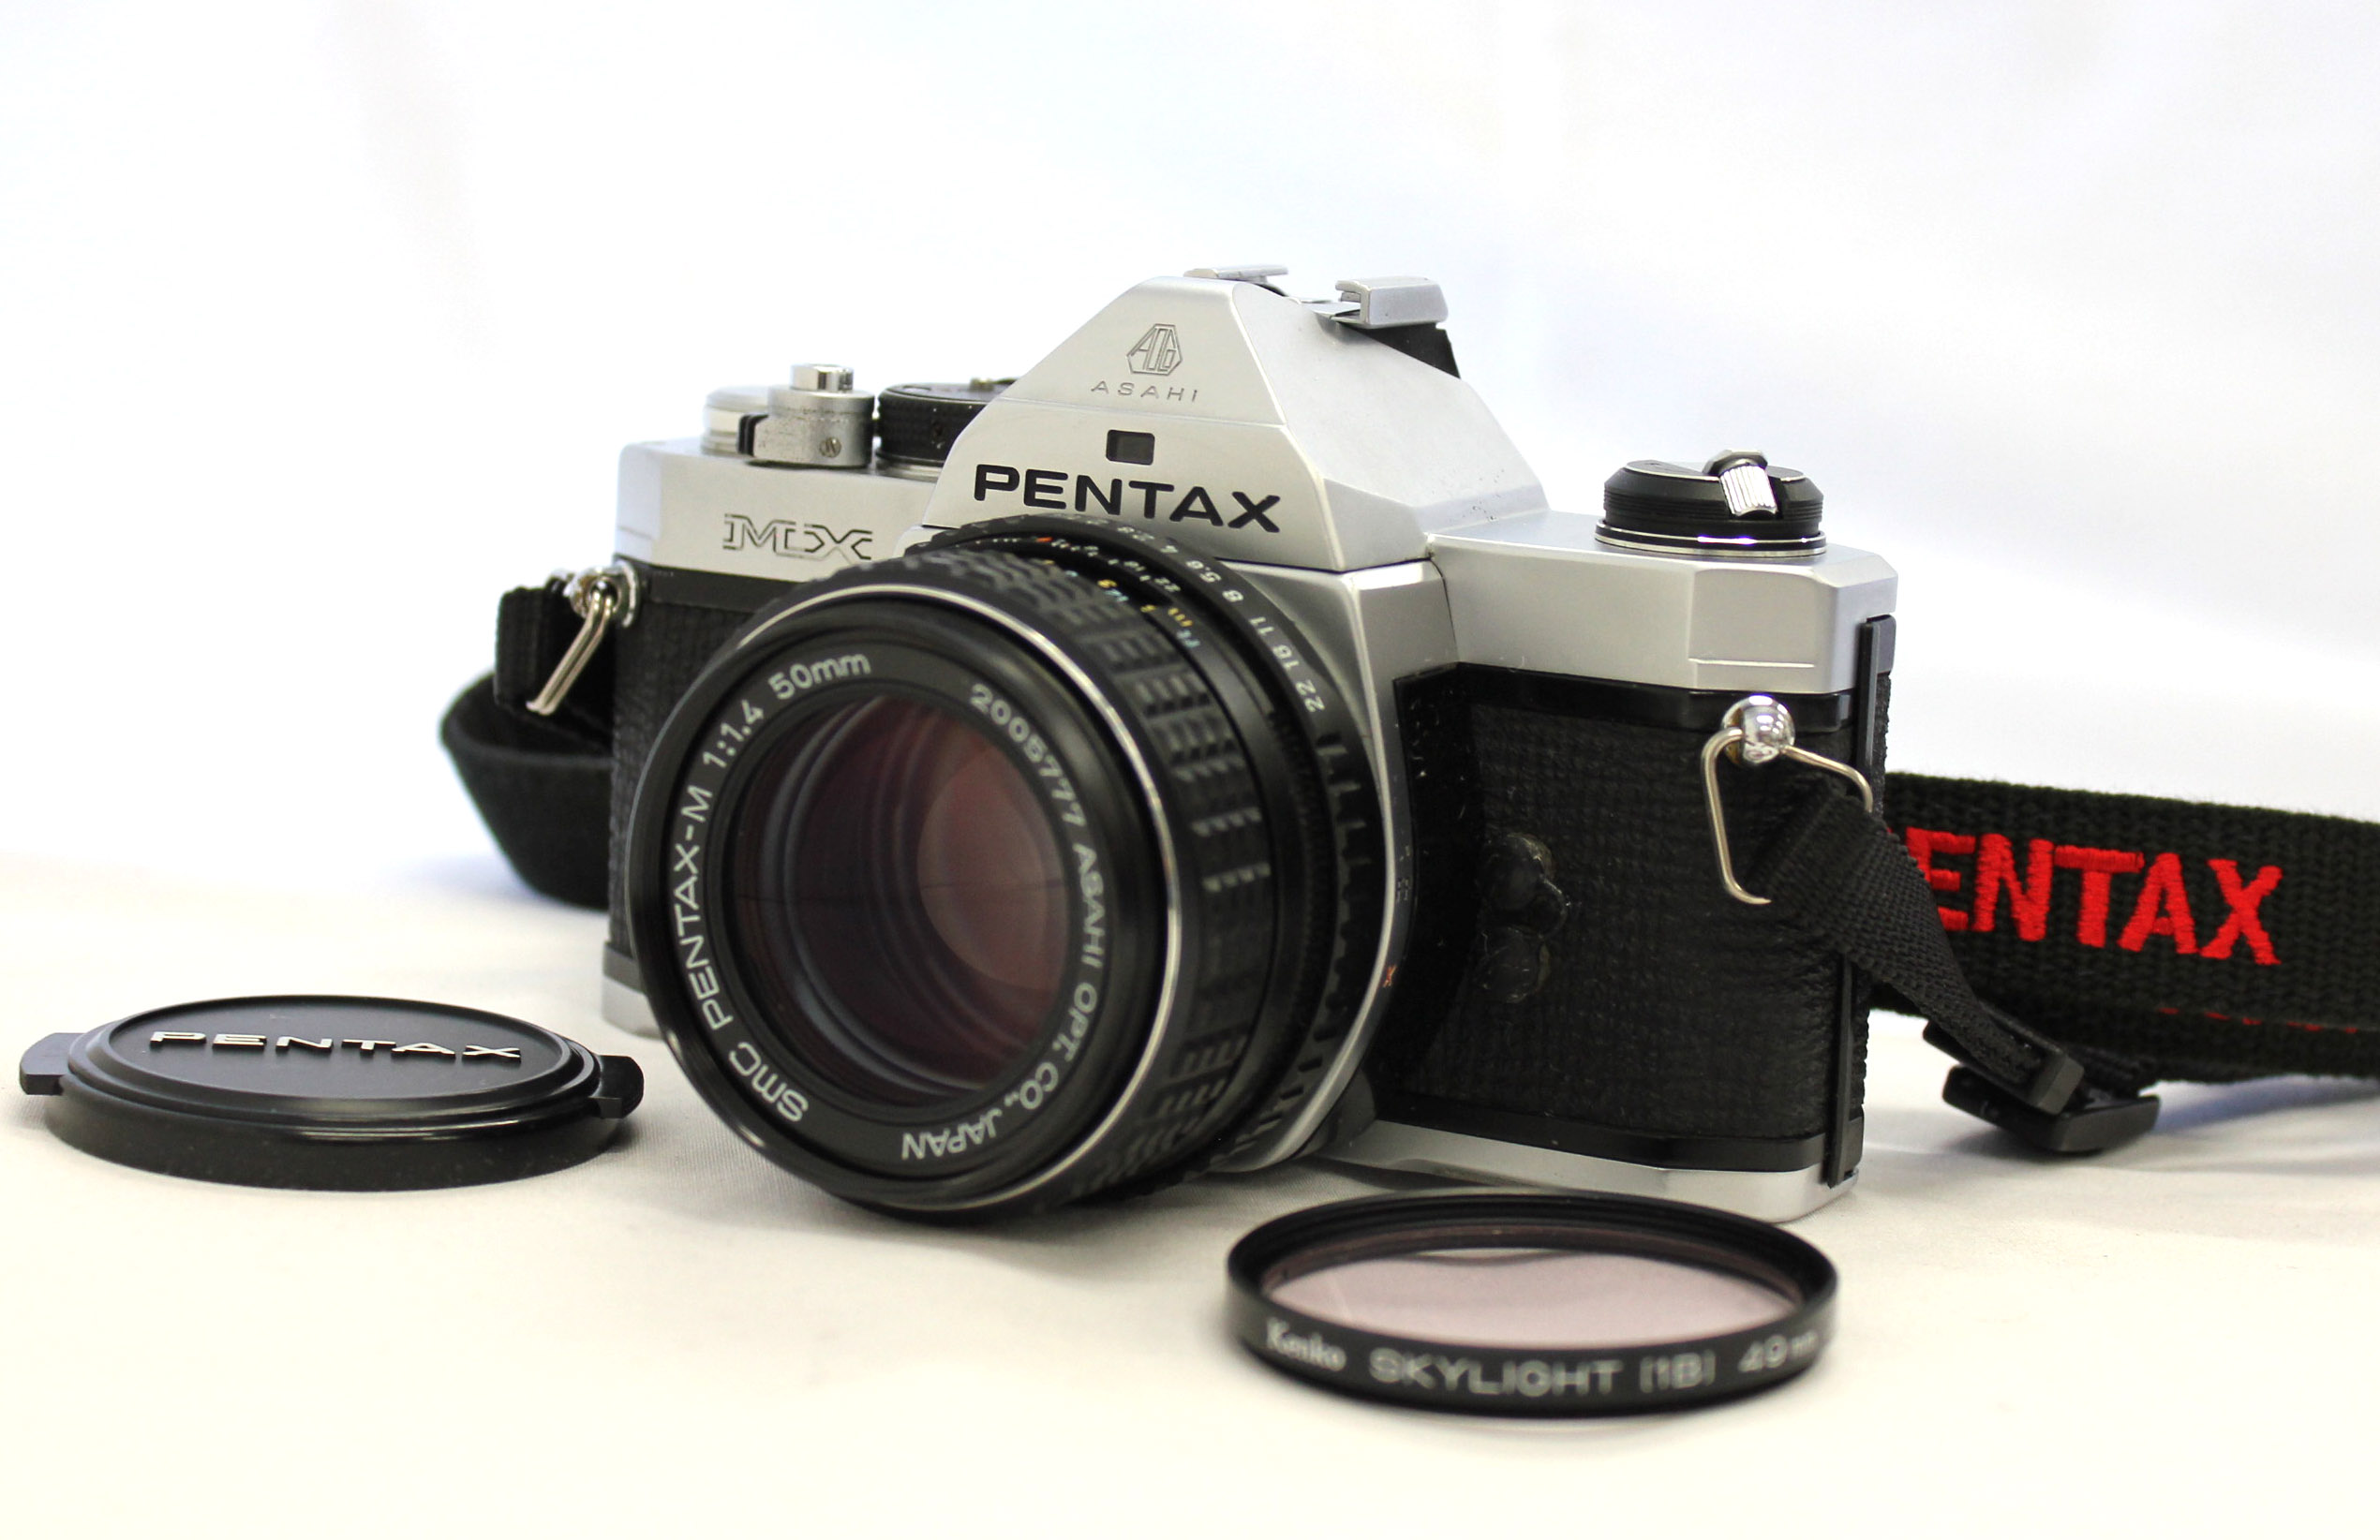 Japan Used Camera Shop | [Excellent+++] Pentax MX SLR 35mm Film Camera with SMC Pentax-M 50mm F/1.4 from Japan